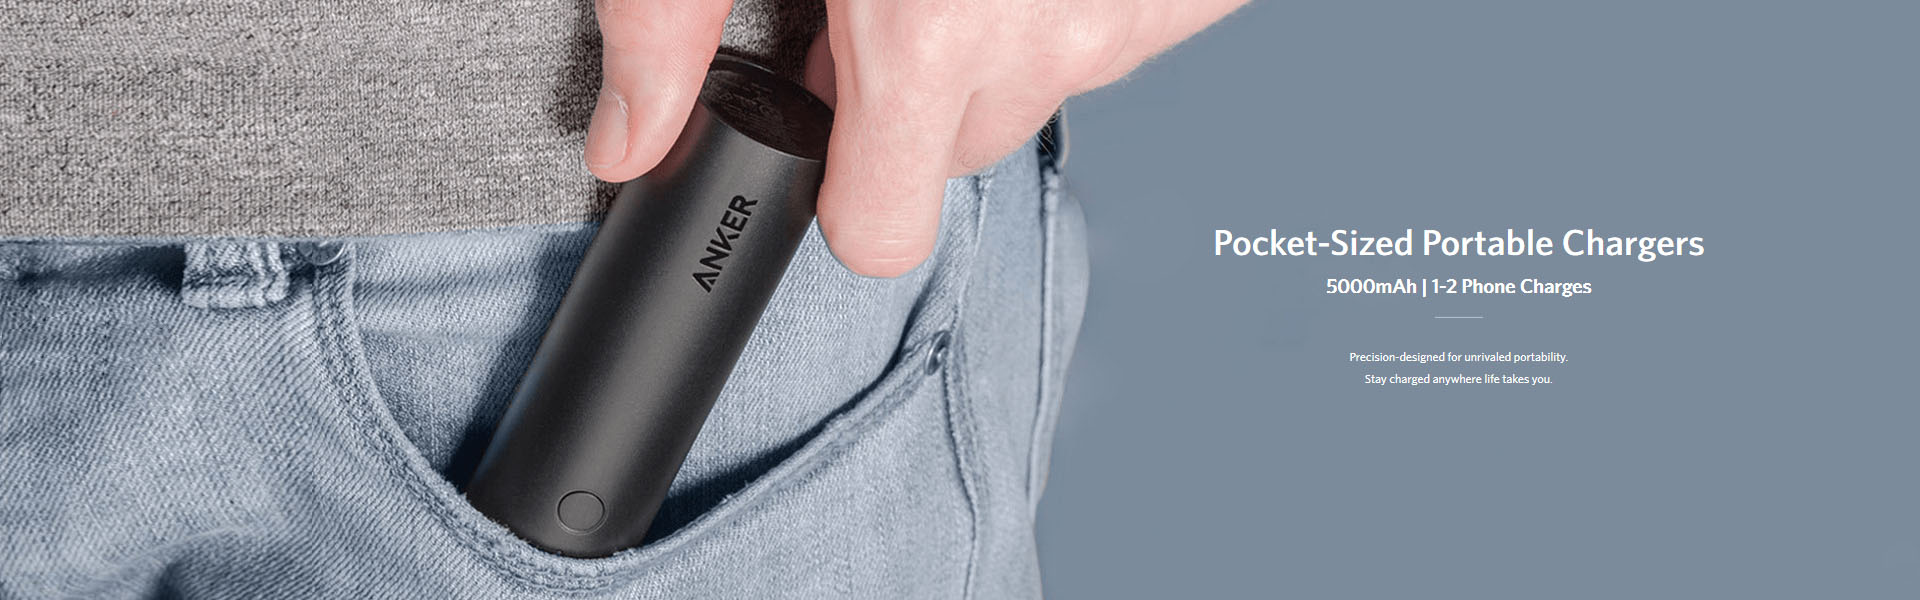  Pocket Size Portable Chargers